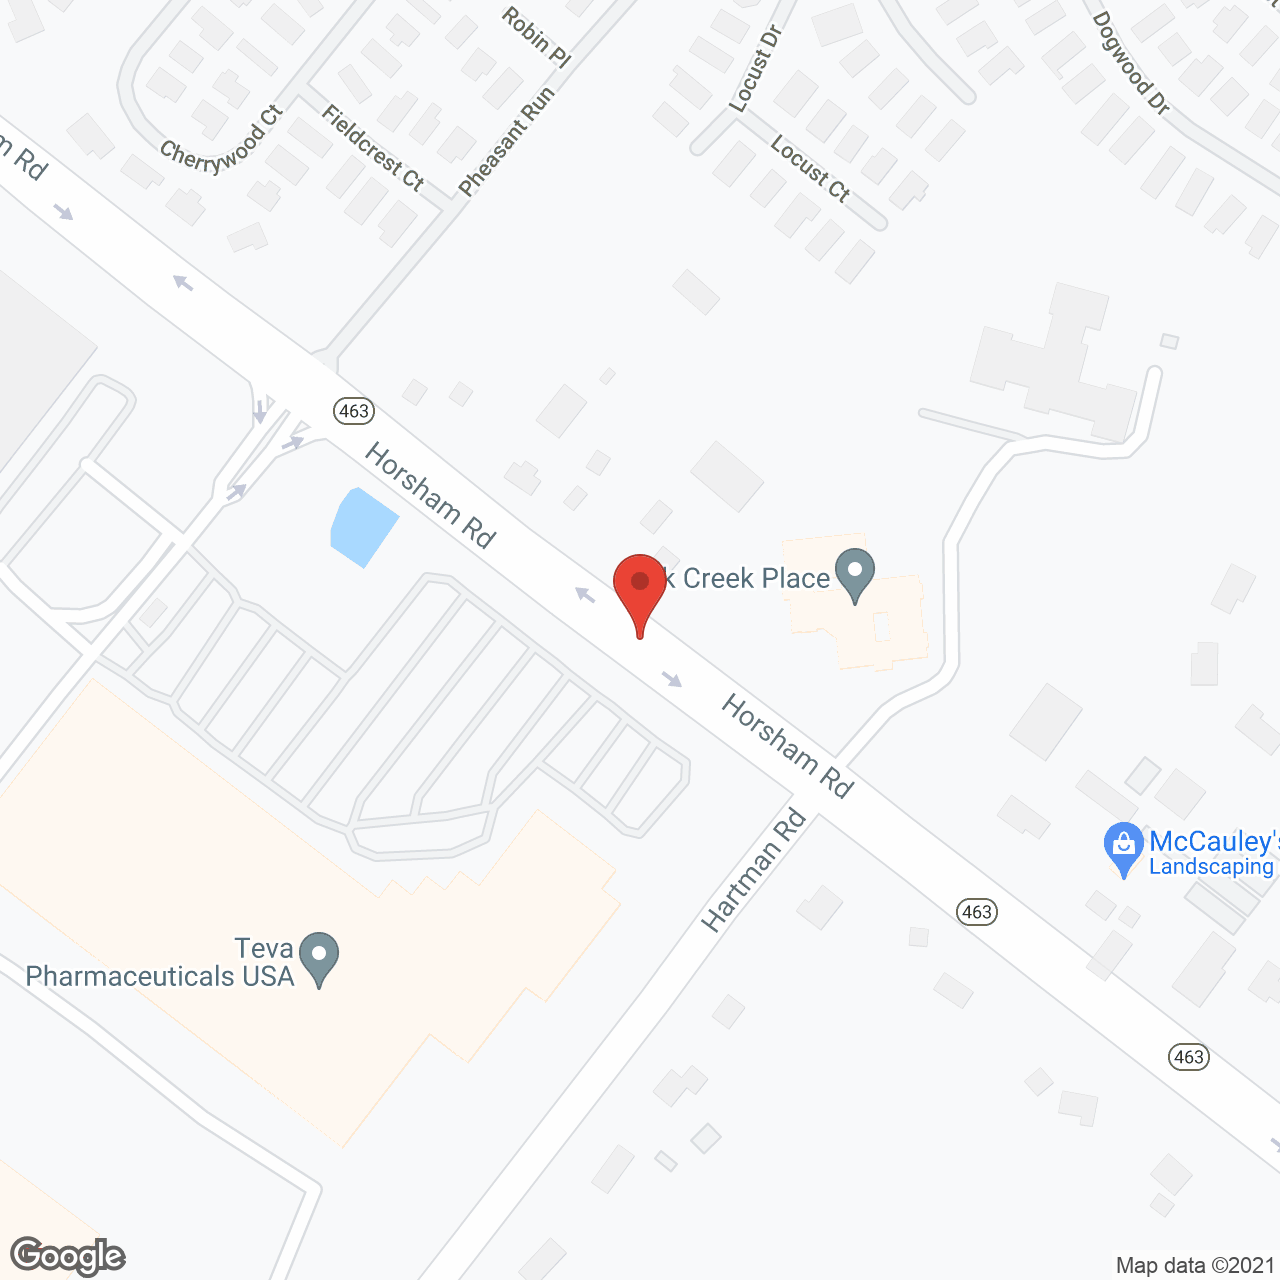 Park Creek Place - PC in google map